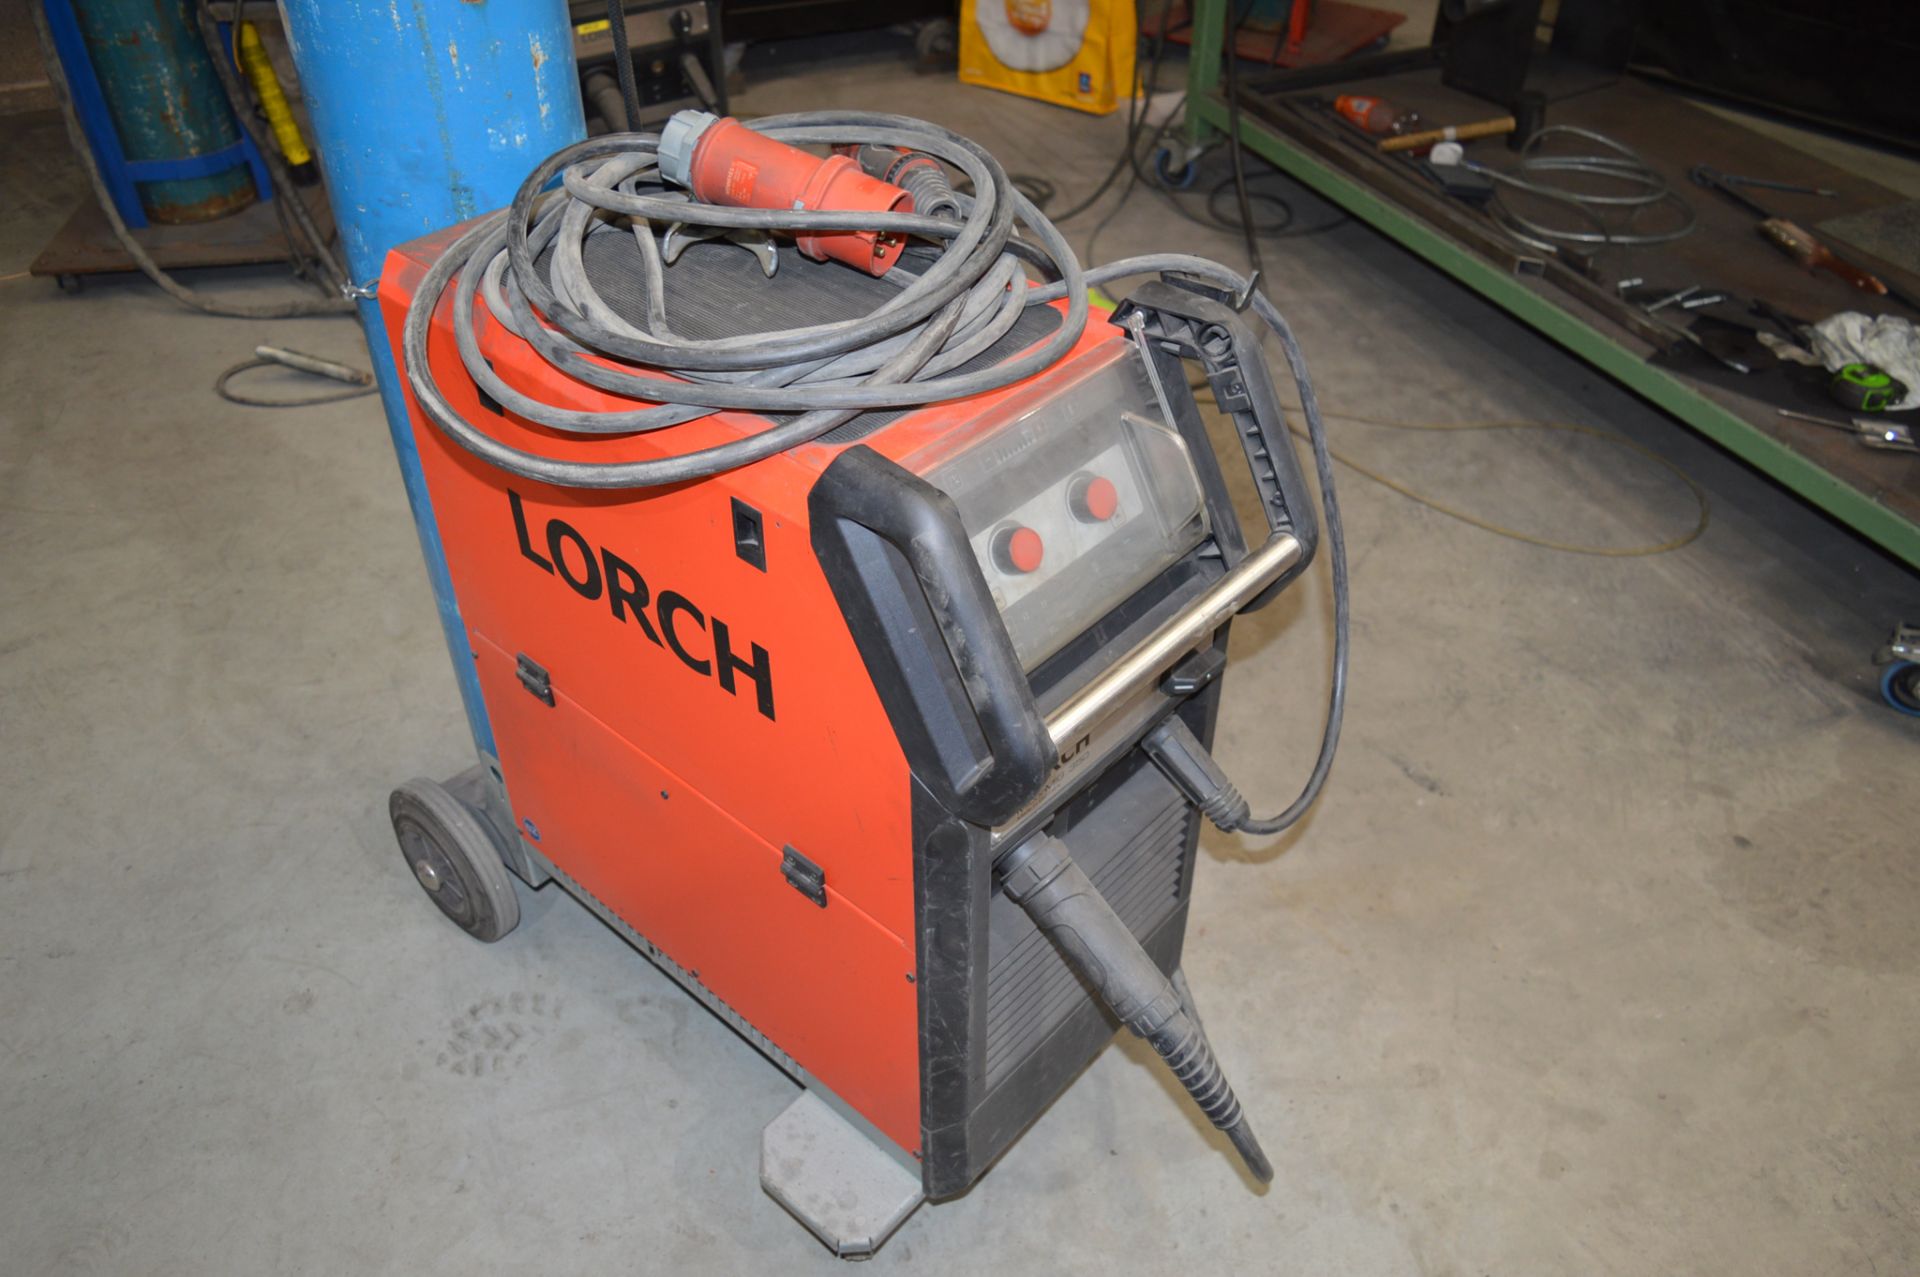 Lorch Micromig 350 MIG welder S/N: 4060-2712-0012-3 c/w torch, regulator and earth lead ** Not - Image 3 of 5